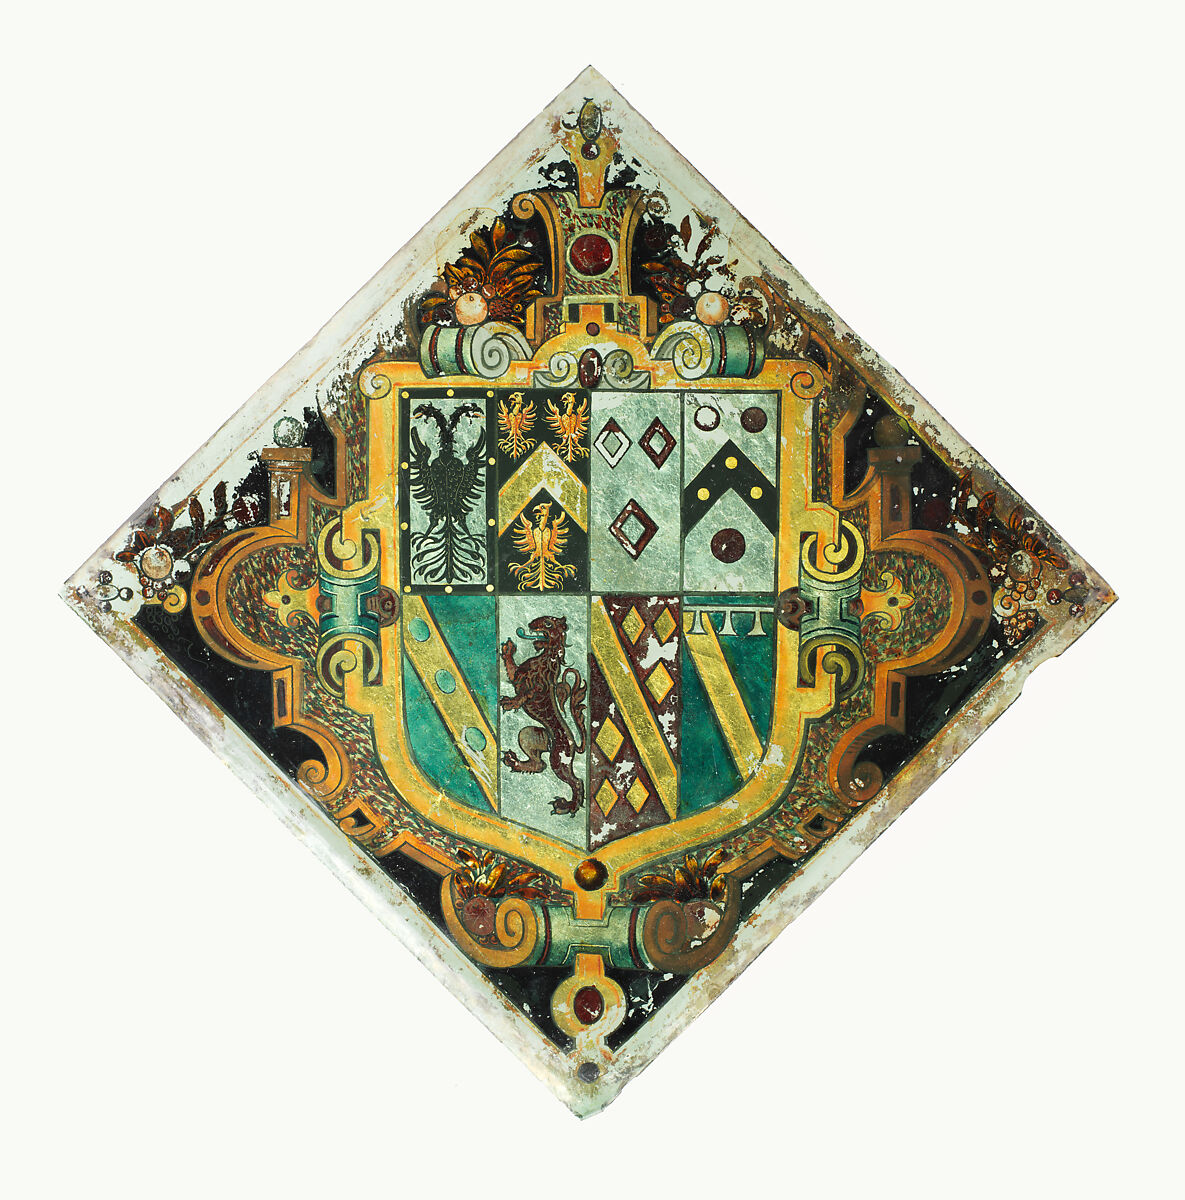 Panel with arms of the Killigrew family of Cornwall, Glass (verre églomisé), British 